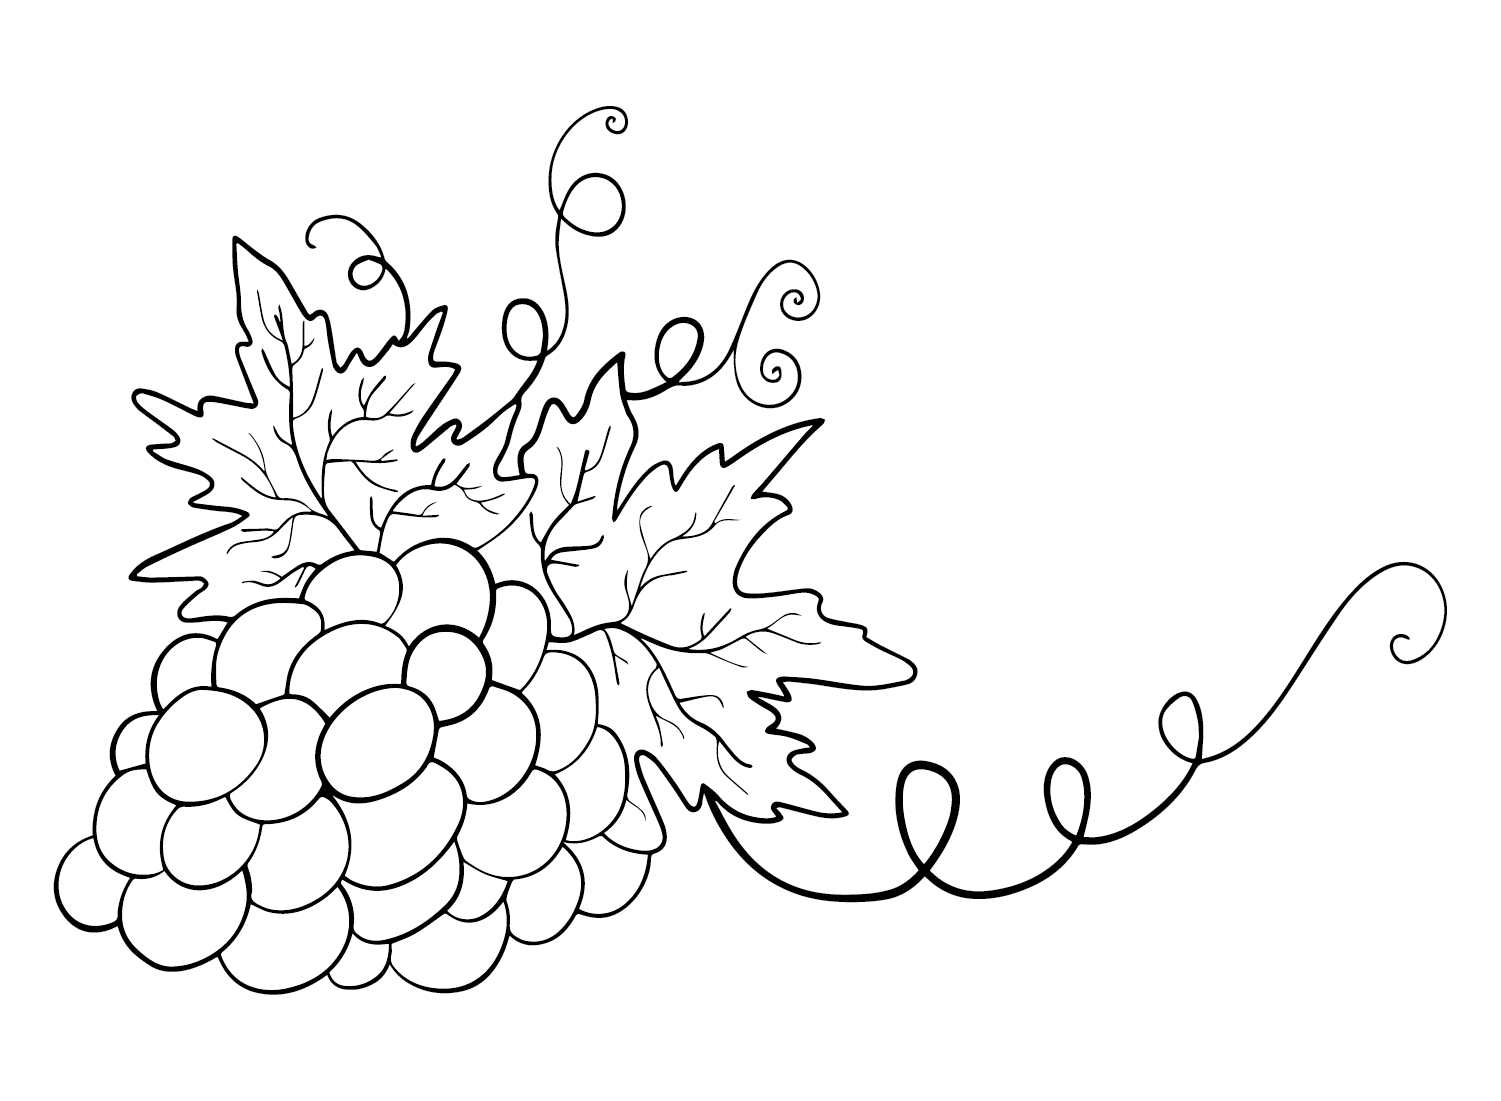 Grapes Free Coloring Page